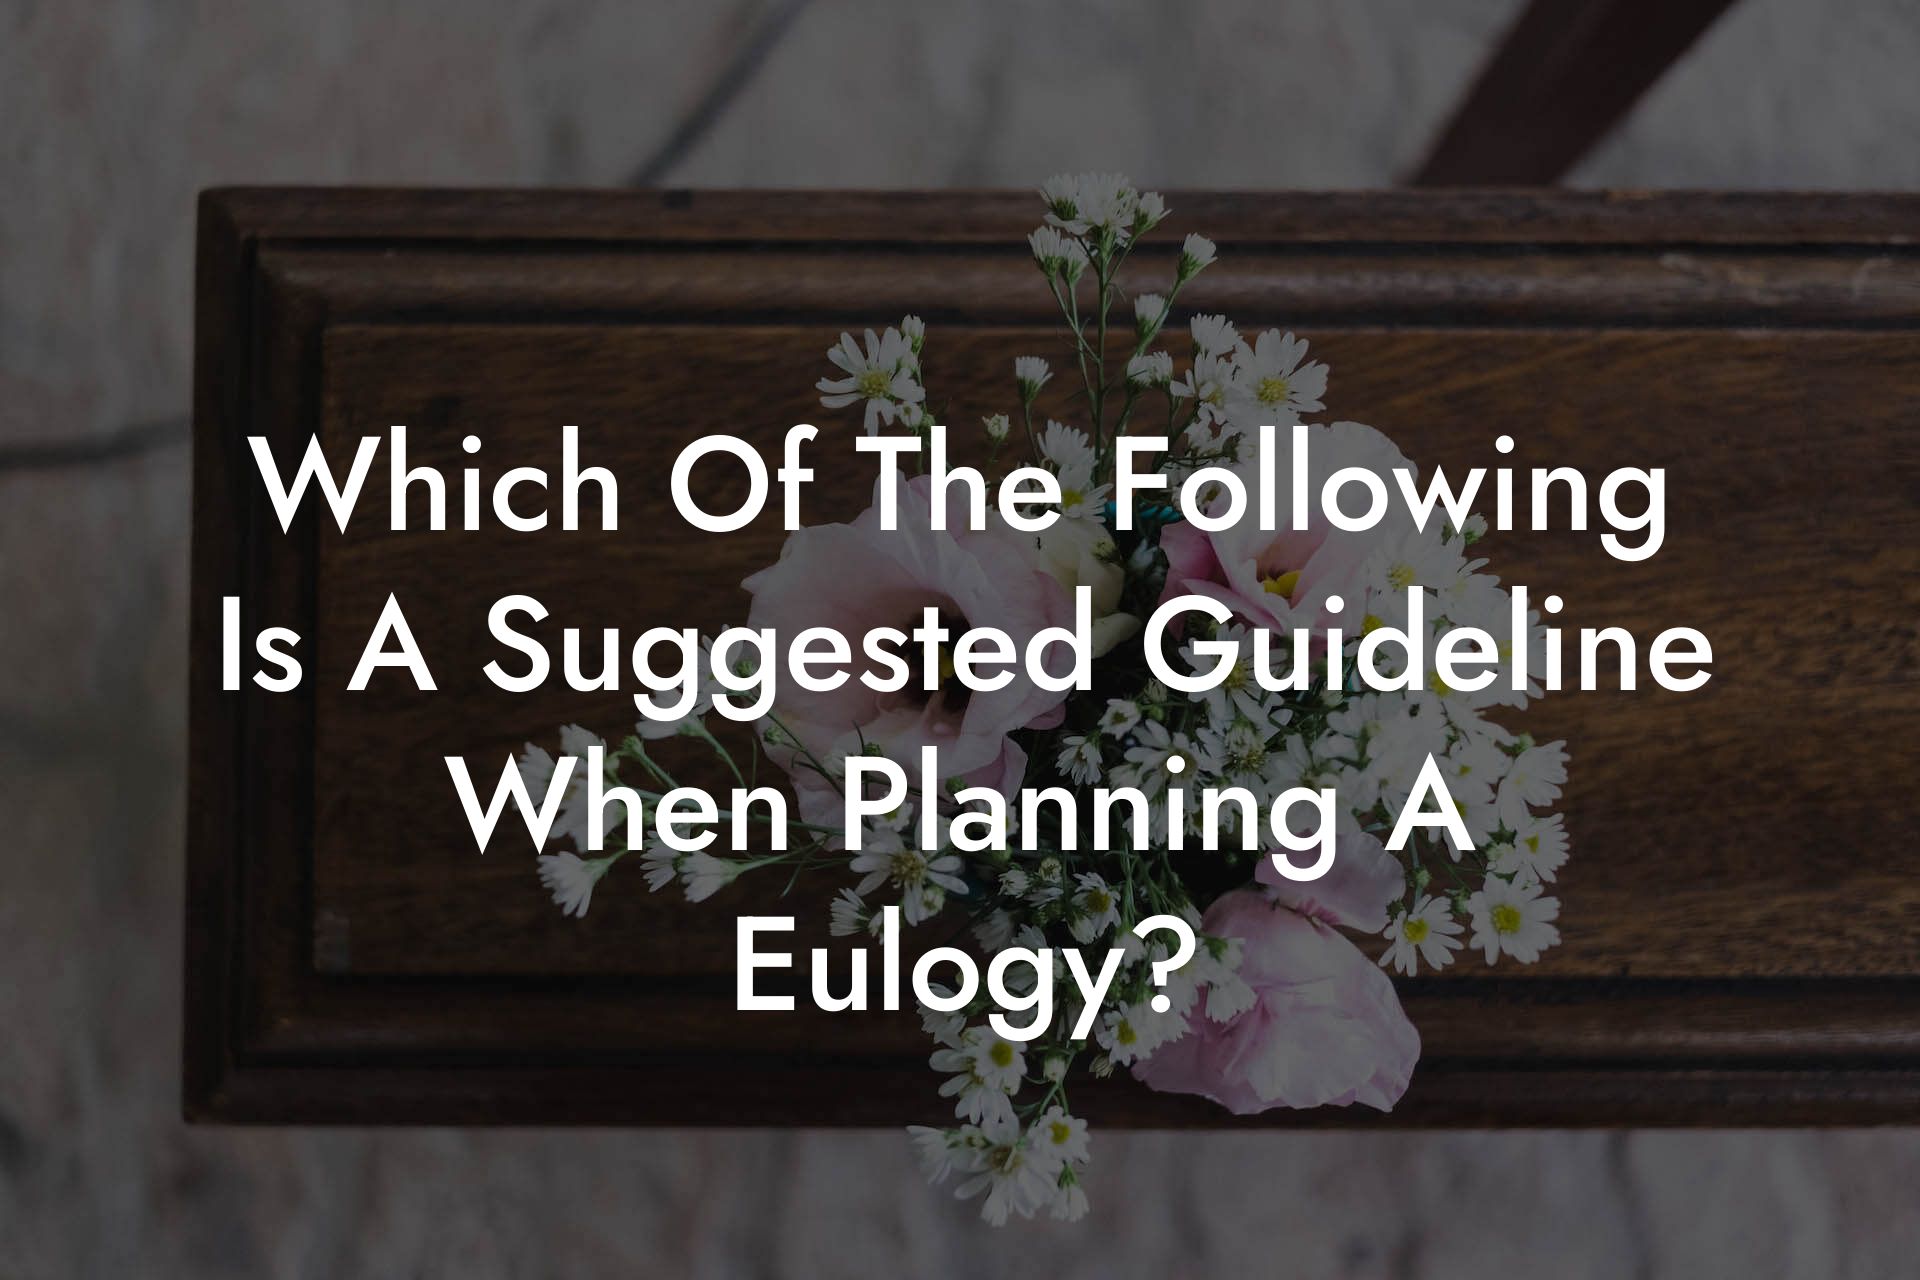 Which Of The Following Is A Suggested Guideline When Planning A Eulogy?